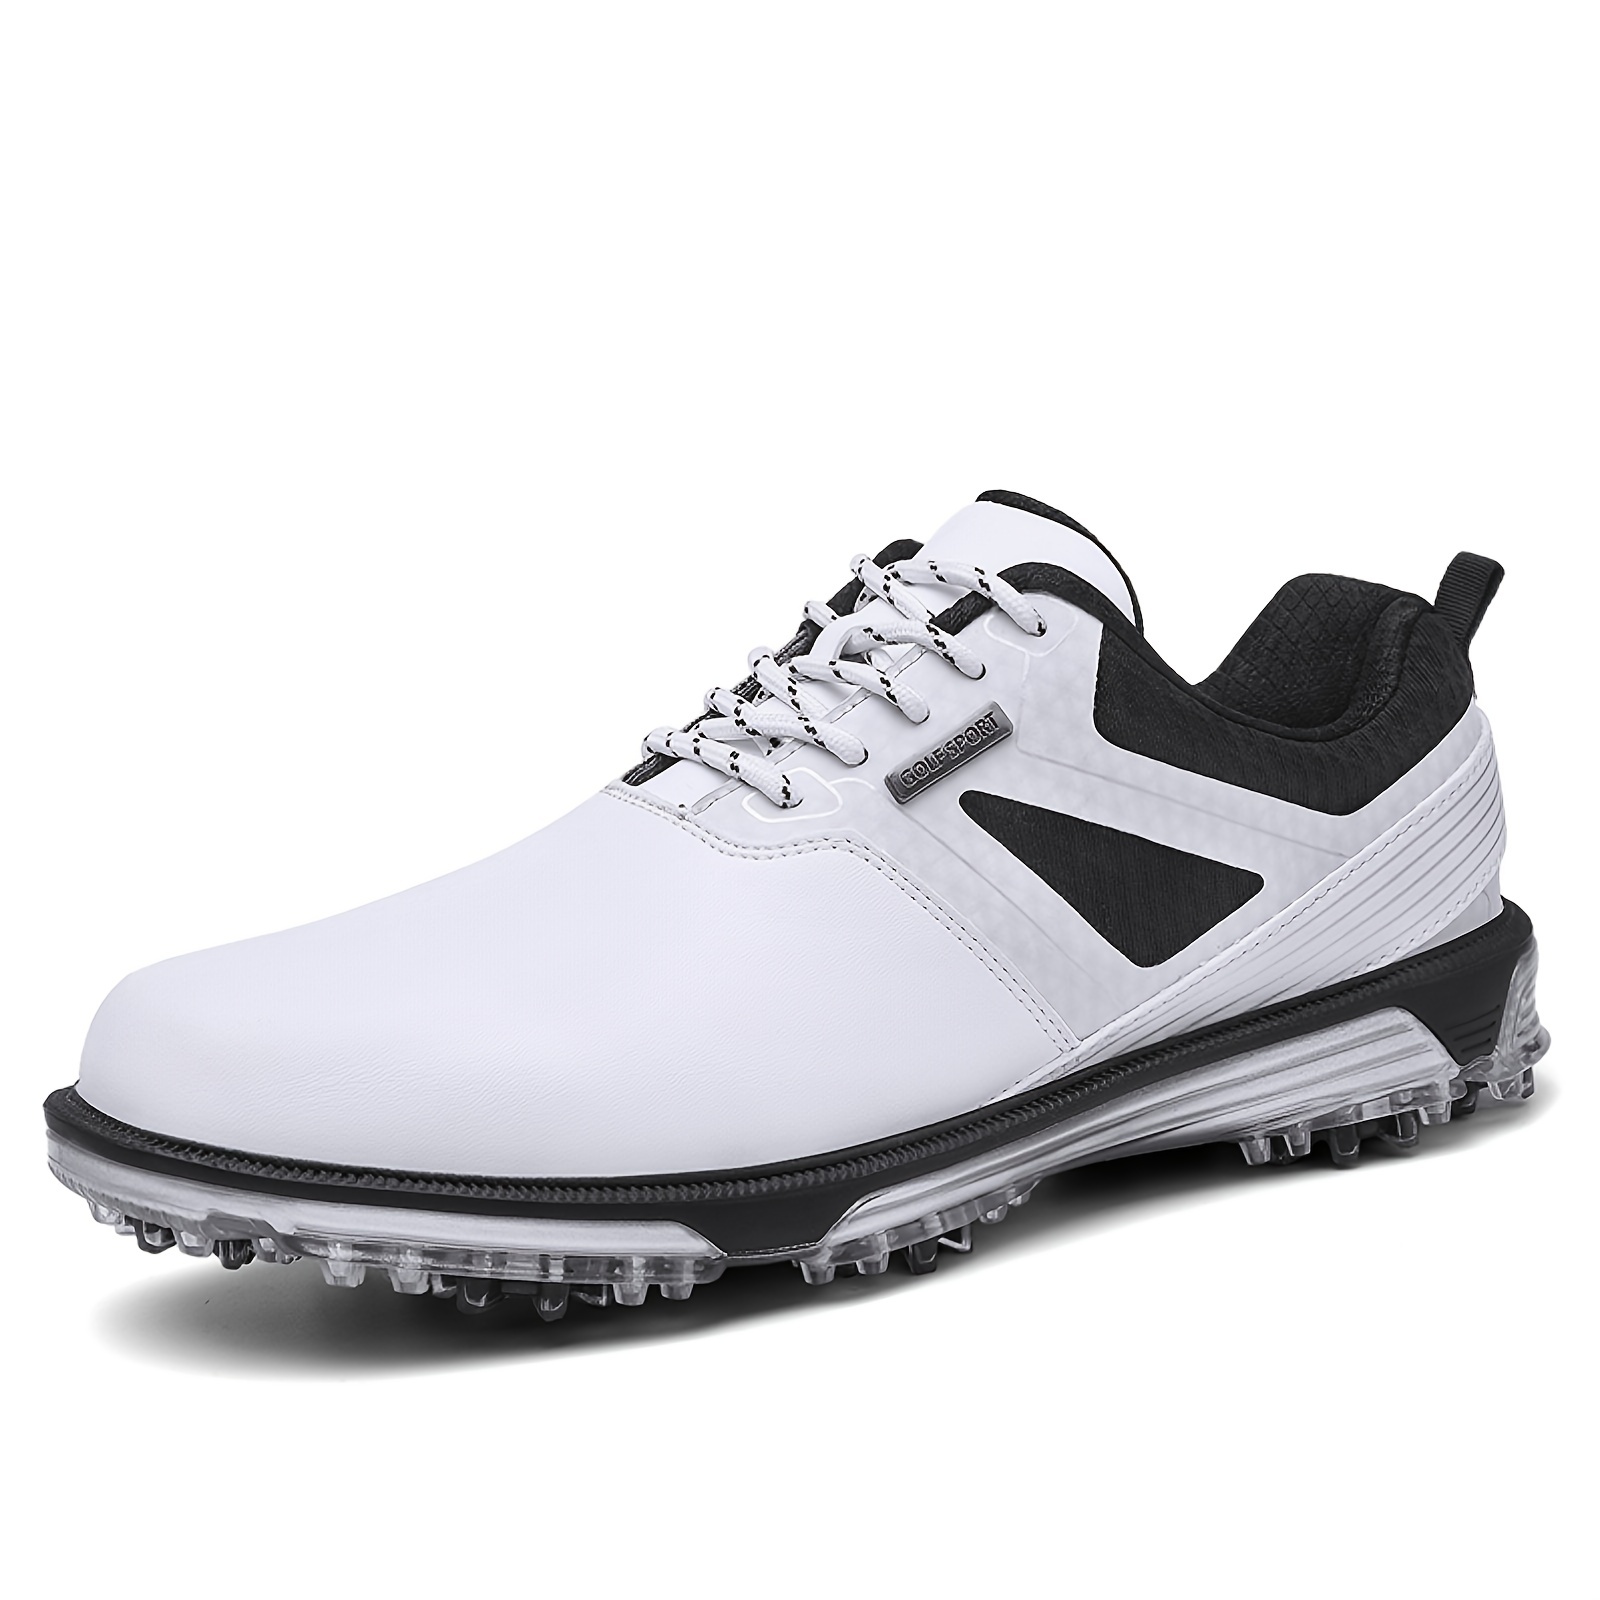 Mens Professional Detachable 8 Spikes Golf Shoes Solid Comfy Non